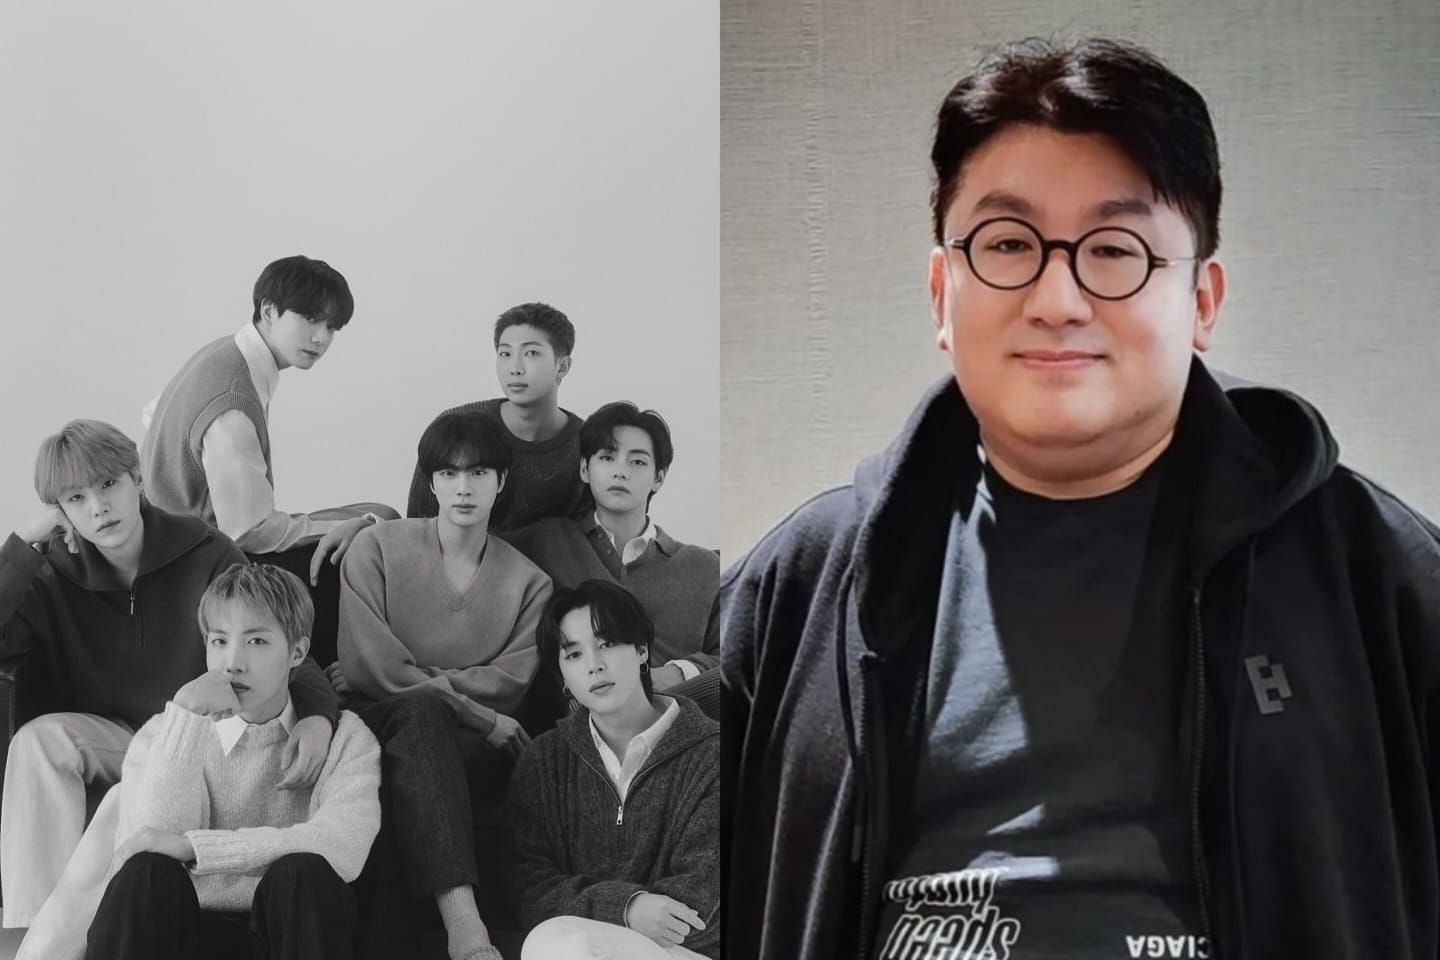 HYBE accused of cult association, concept theft, &amp; more, label issues statement (Image via btsofficial/X and hitmanb72)